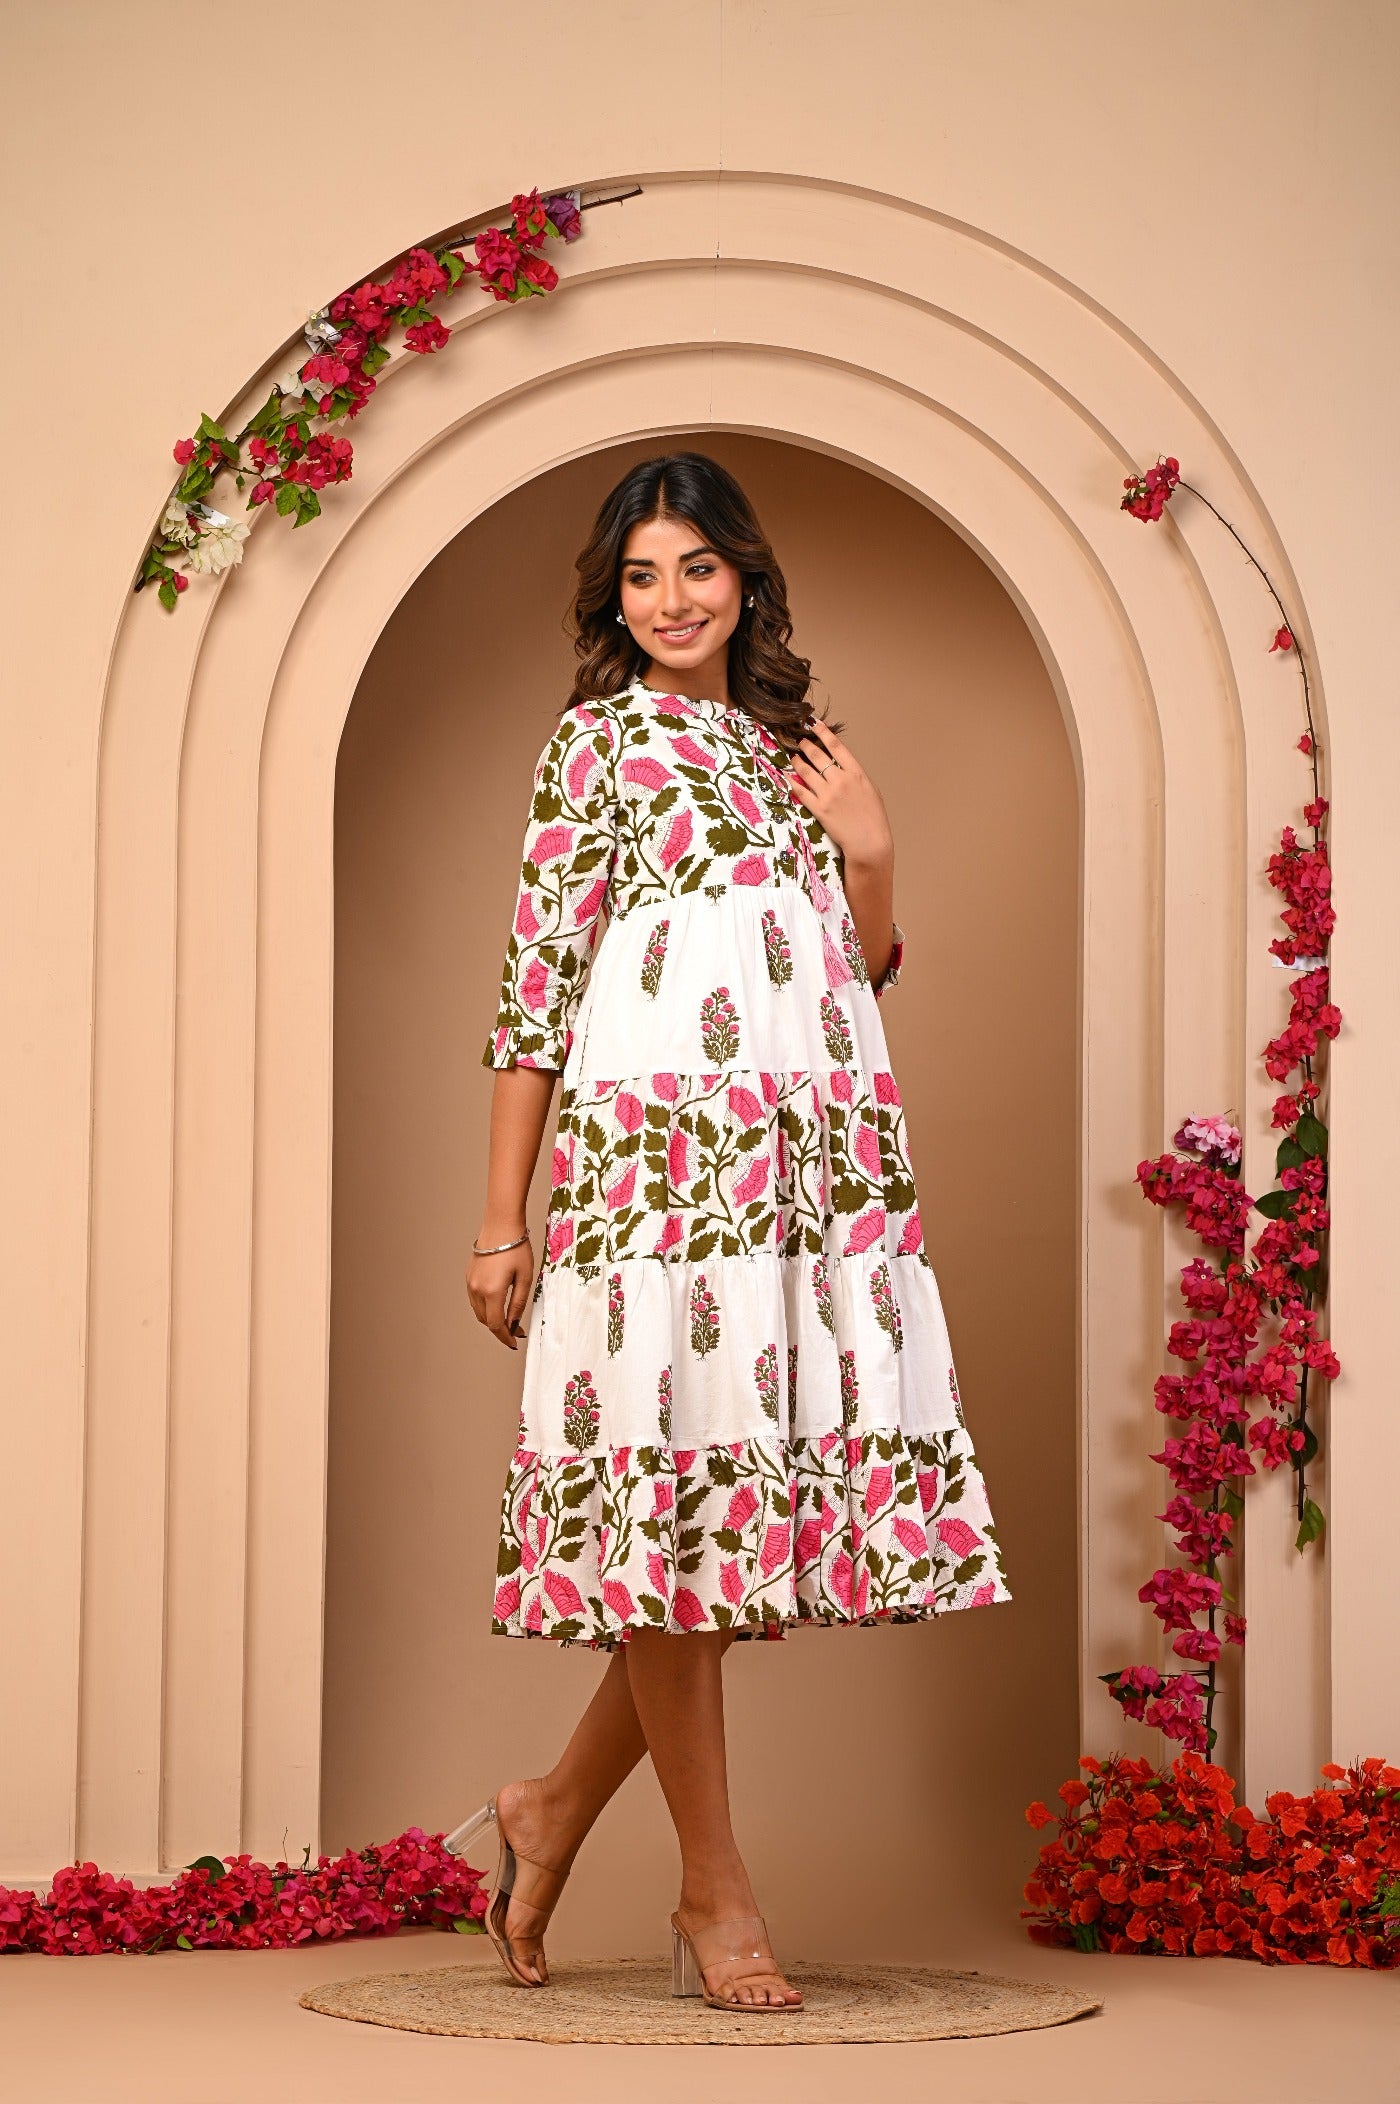 Bloom in Style with Aaronee's Cotton Flower published Middy.